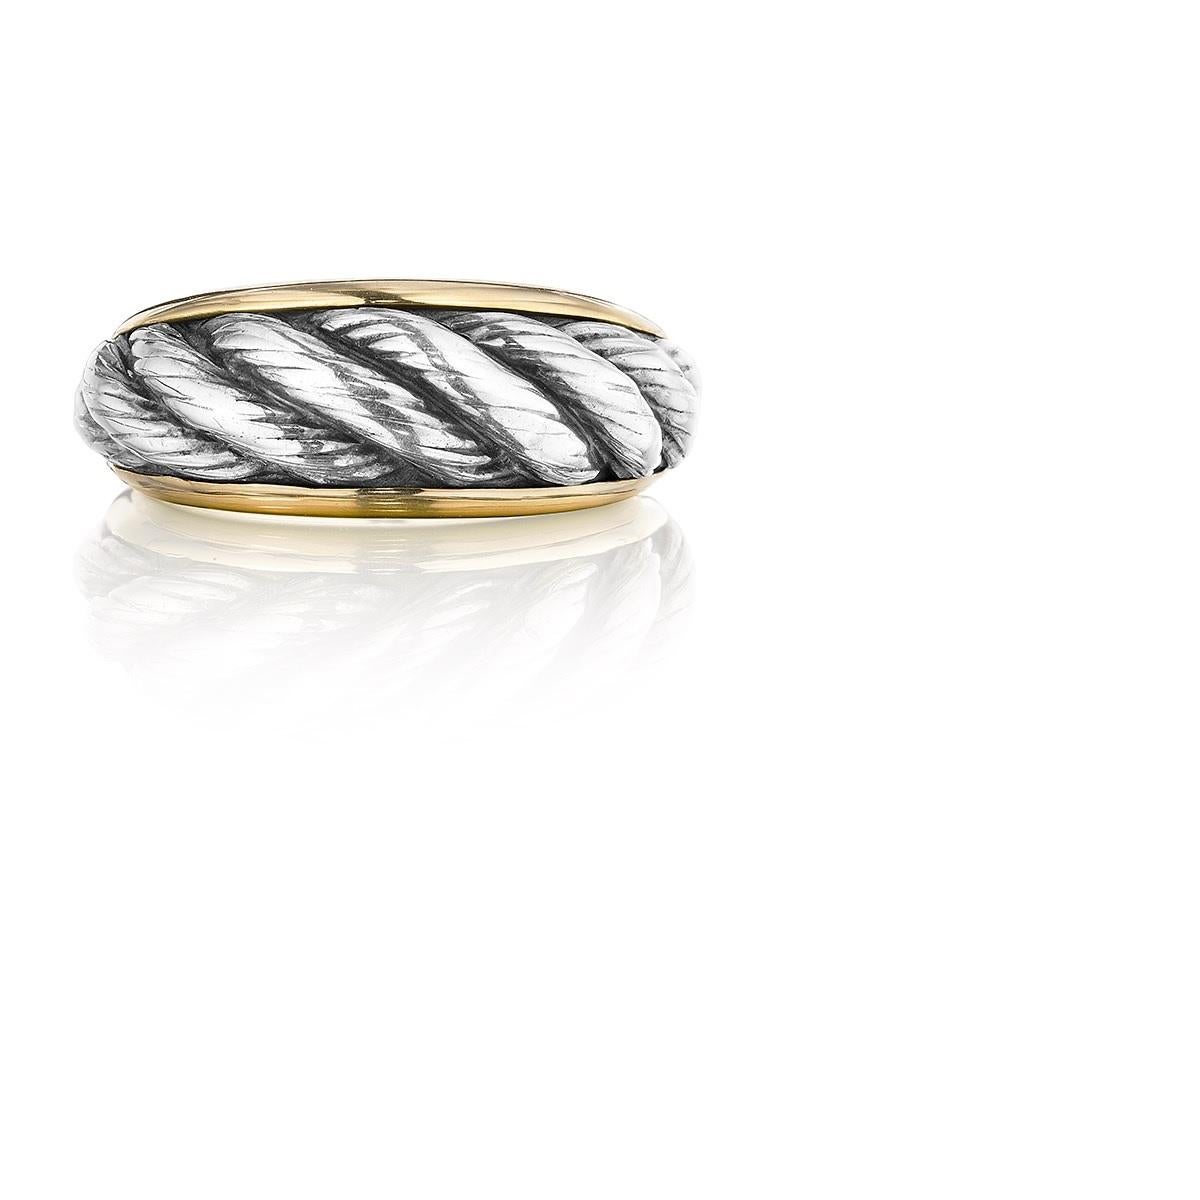 An 18 karat white and yellow gold ring by Van Cleef & Arpels. The center of the ring is white gold with a twisted rope pattern.  Circa 1970's.
Signed, 